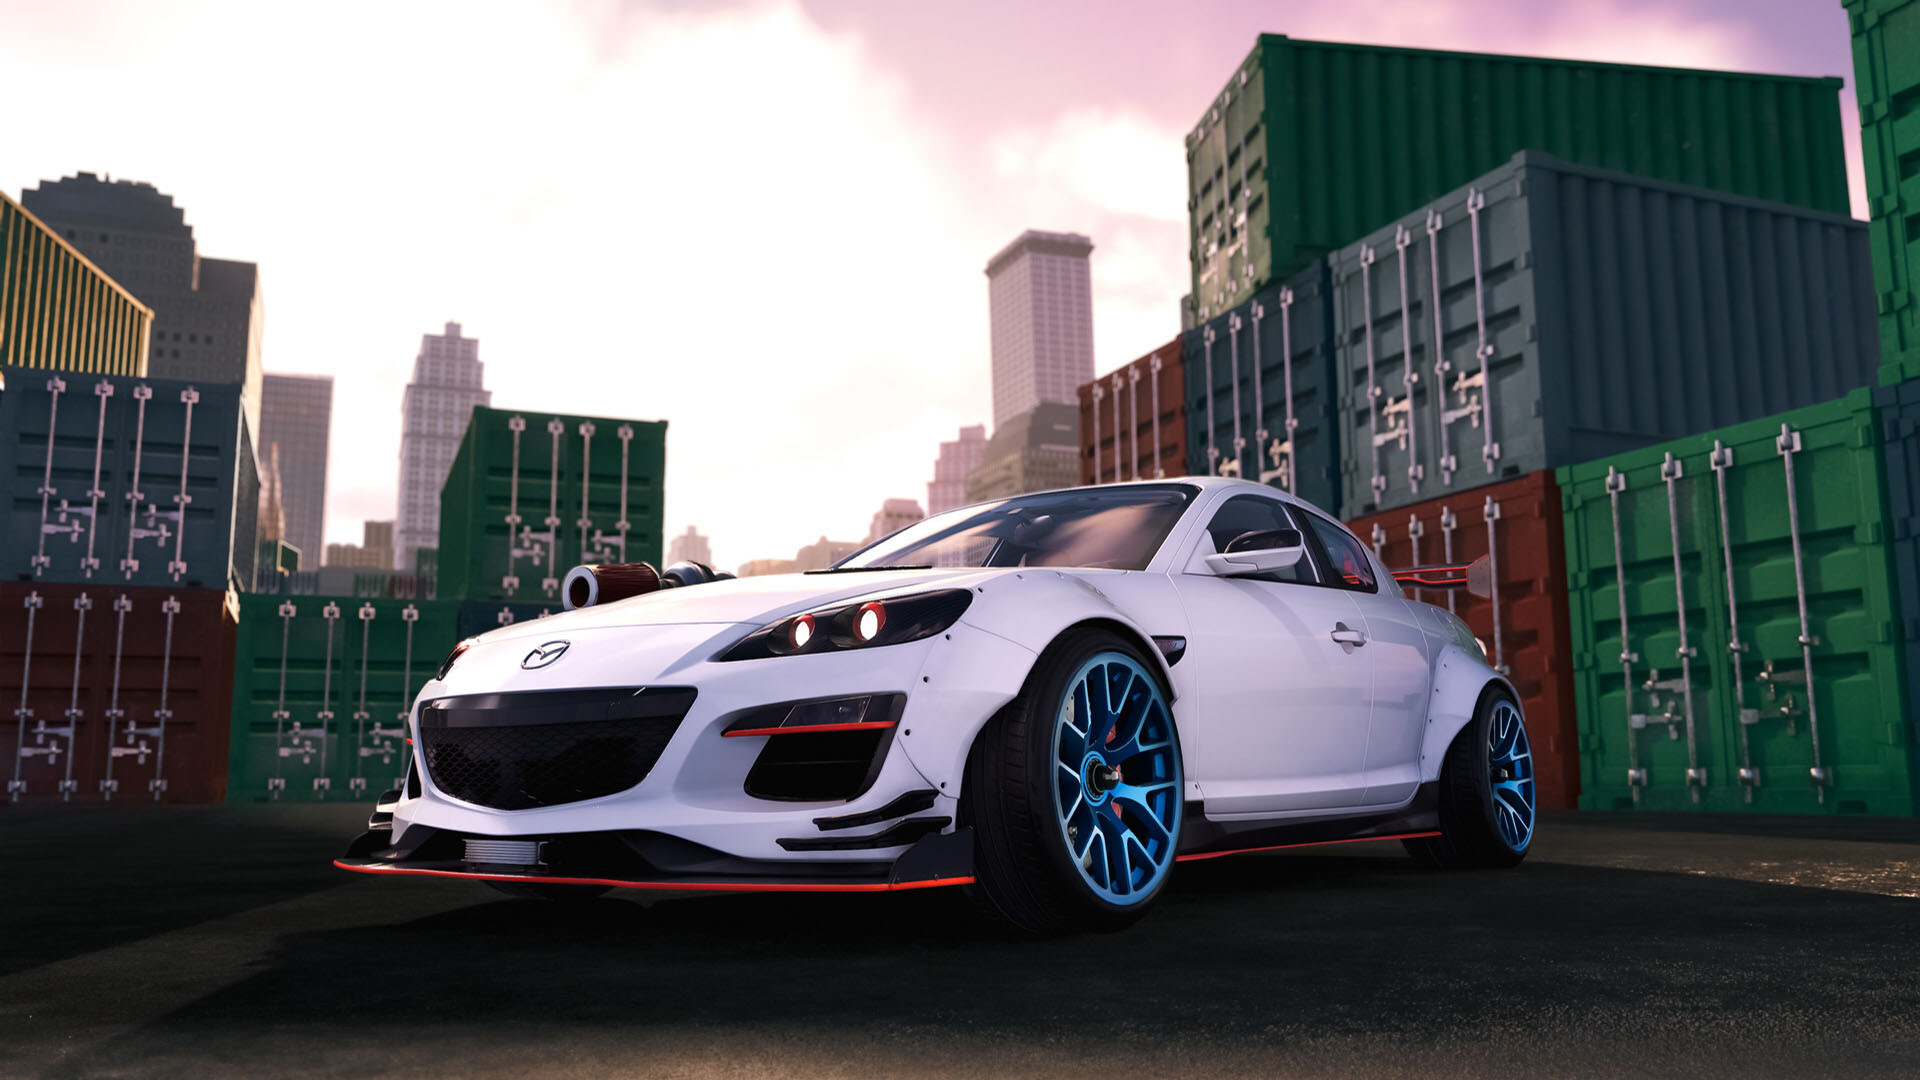 The Crew 2 - Mazda RX8 Starter Pack on Steam